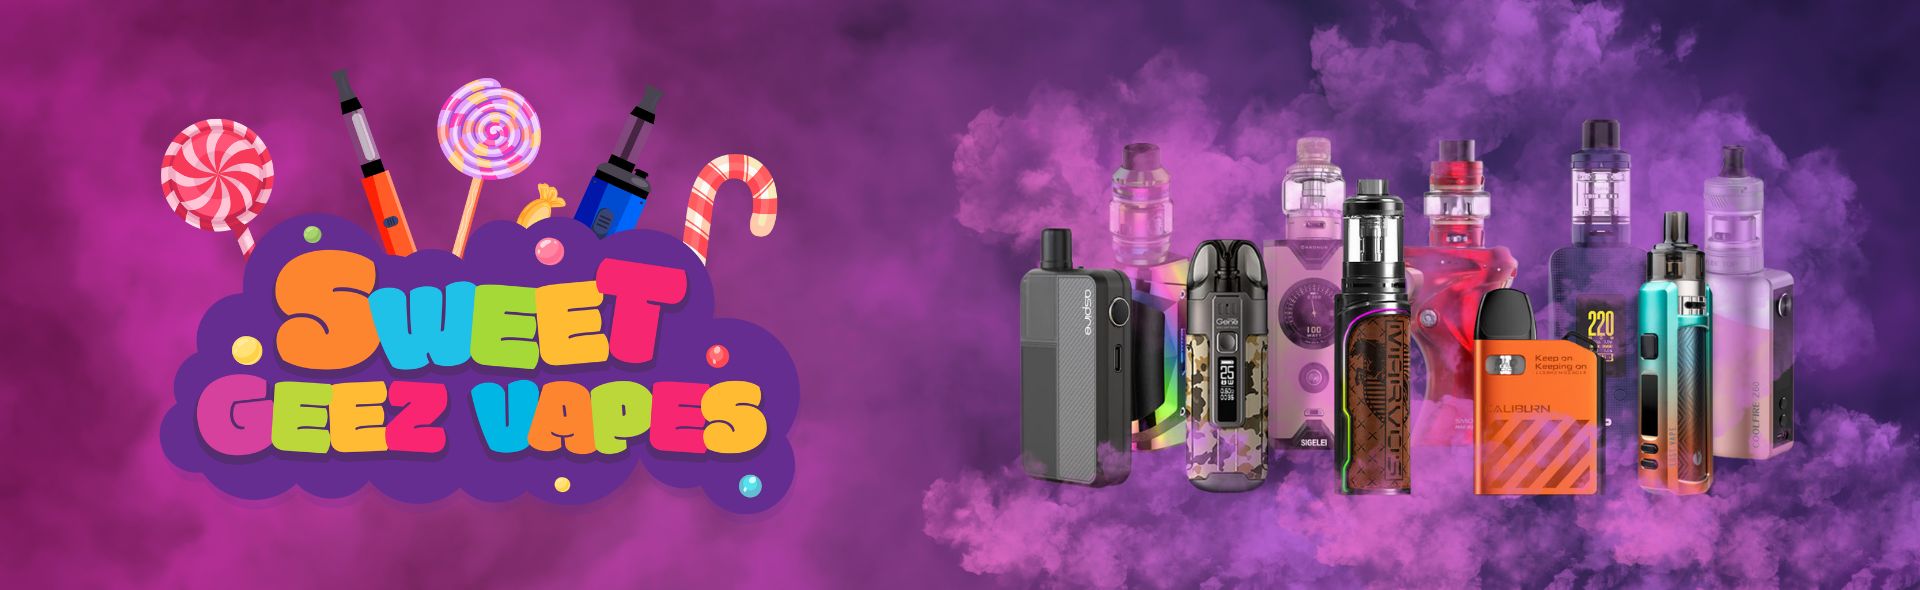 Vape Devices available at Sweet Geez Vapes